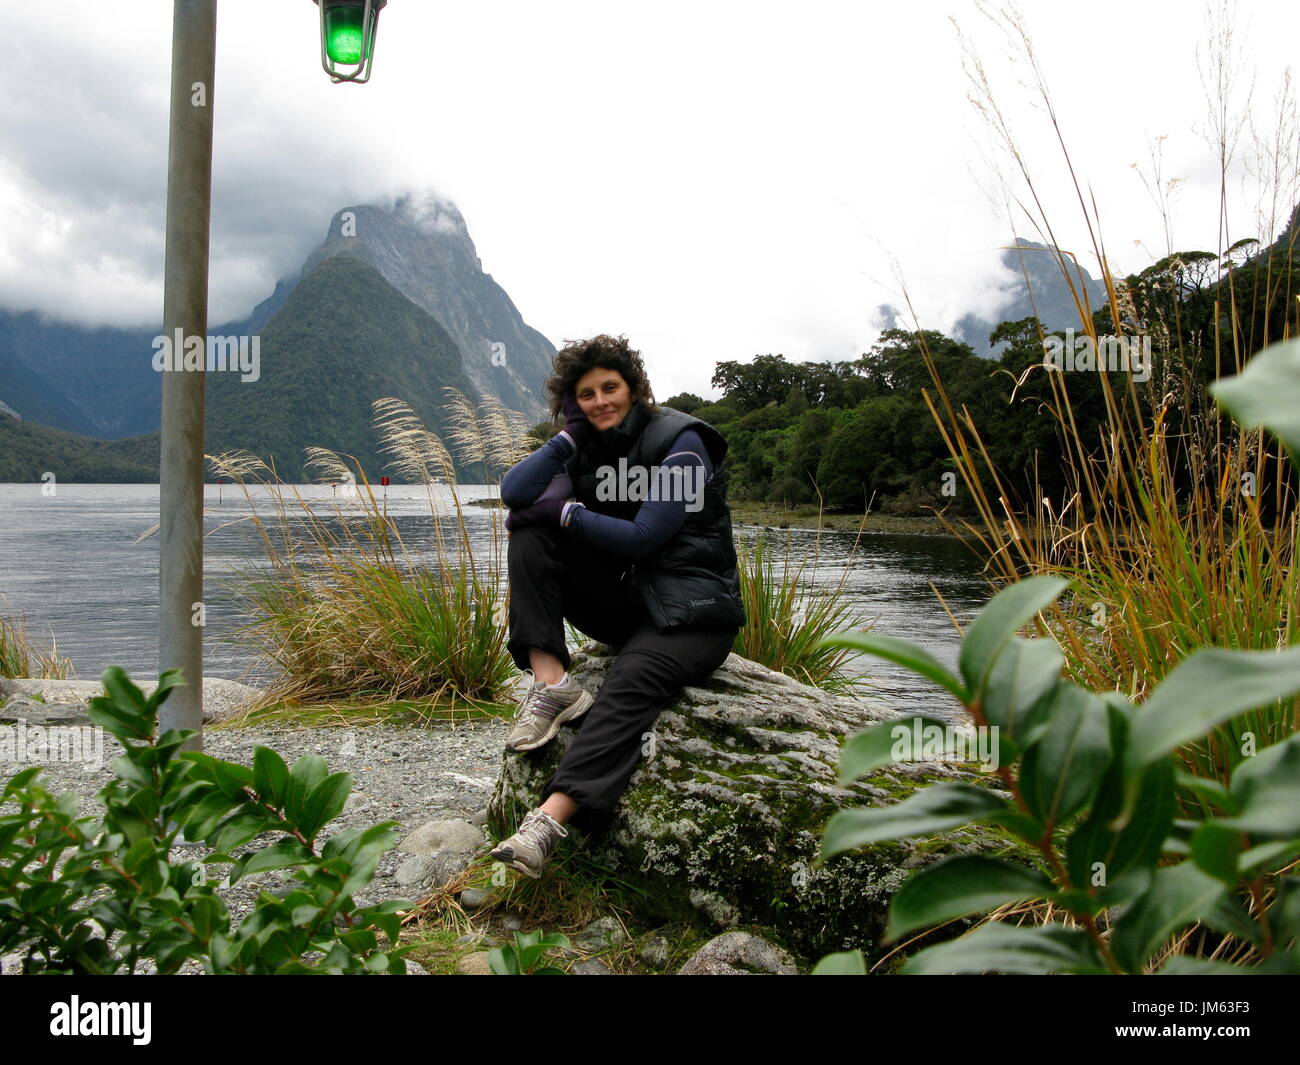 Lady in picturesque setting at Milford Sound Stock Photo